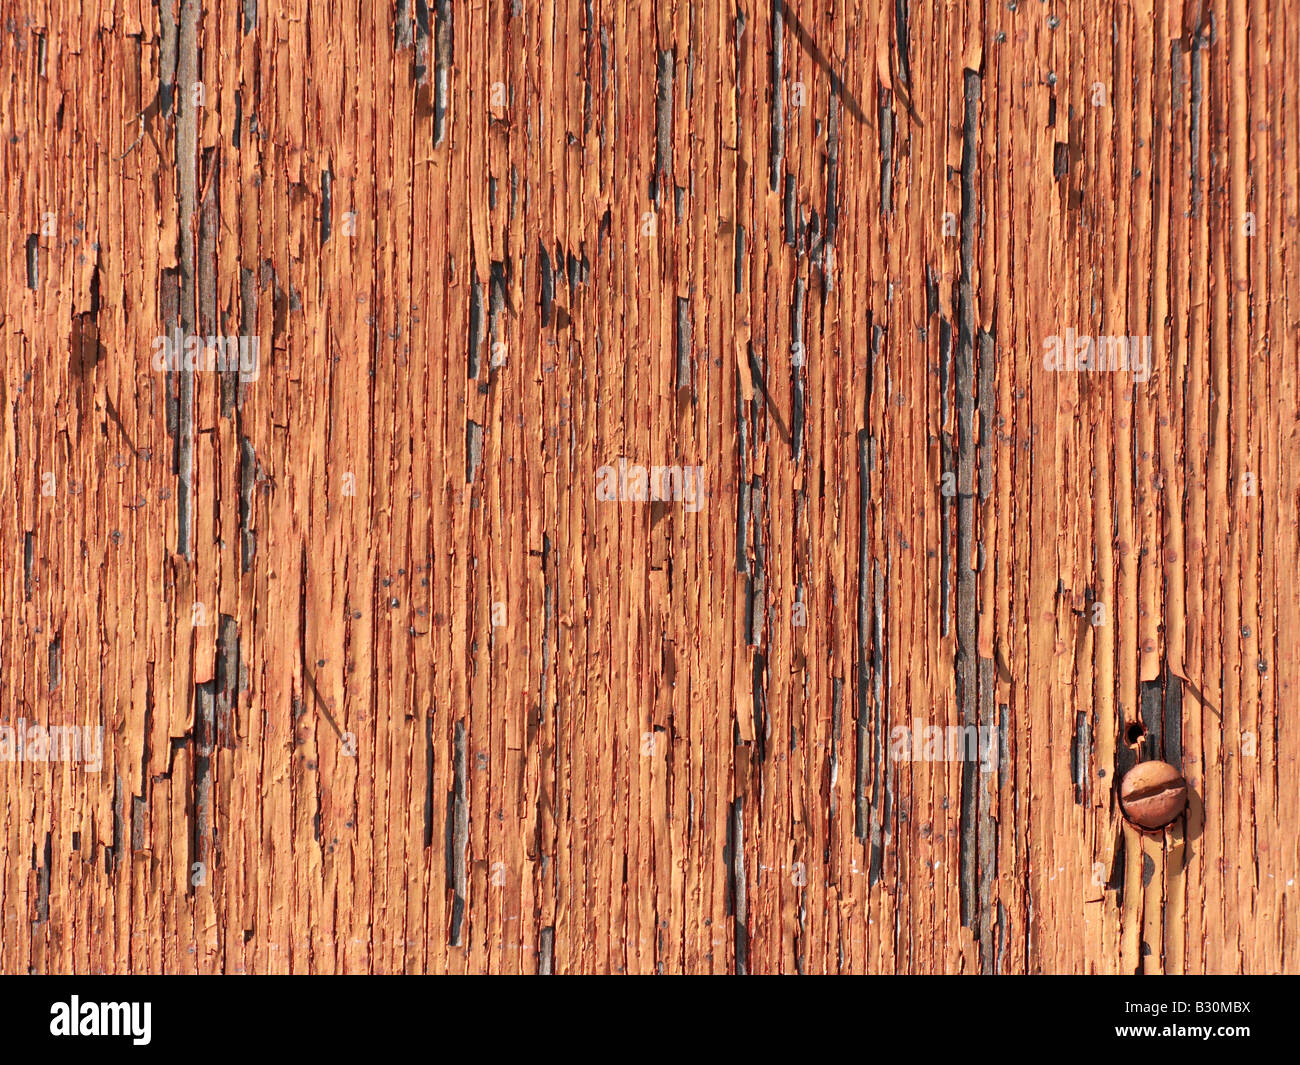 Abstract background close up surface texture Stock Photo